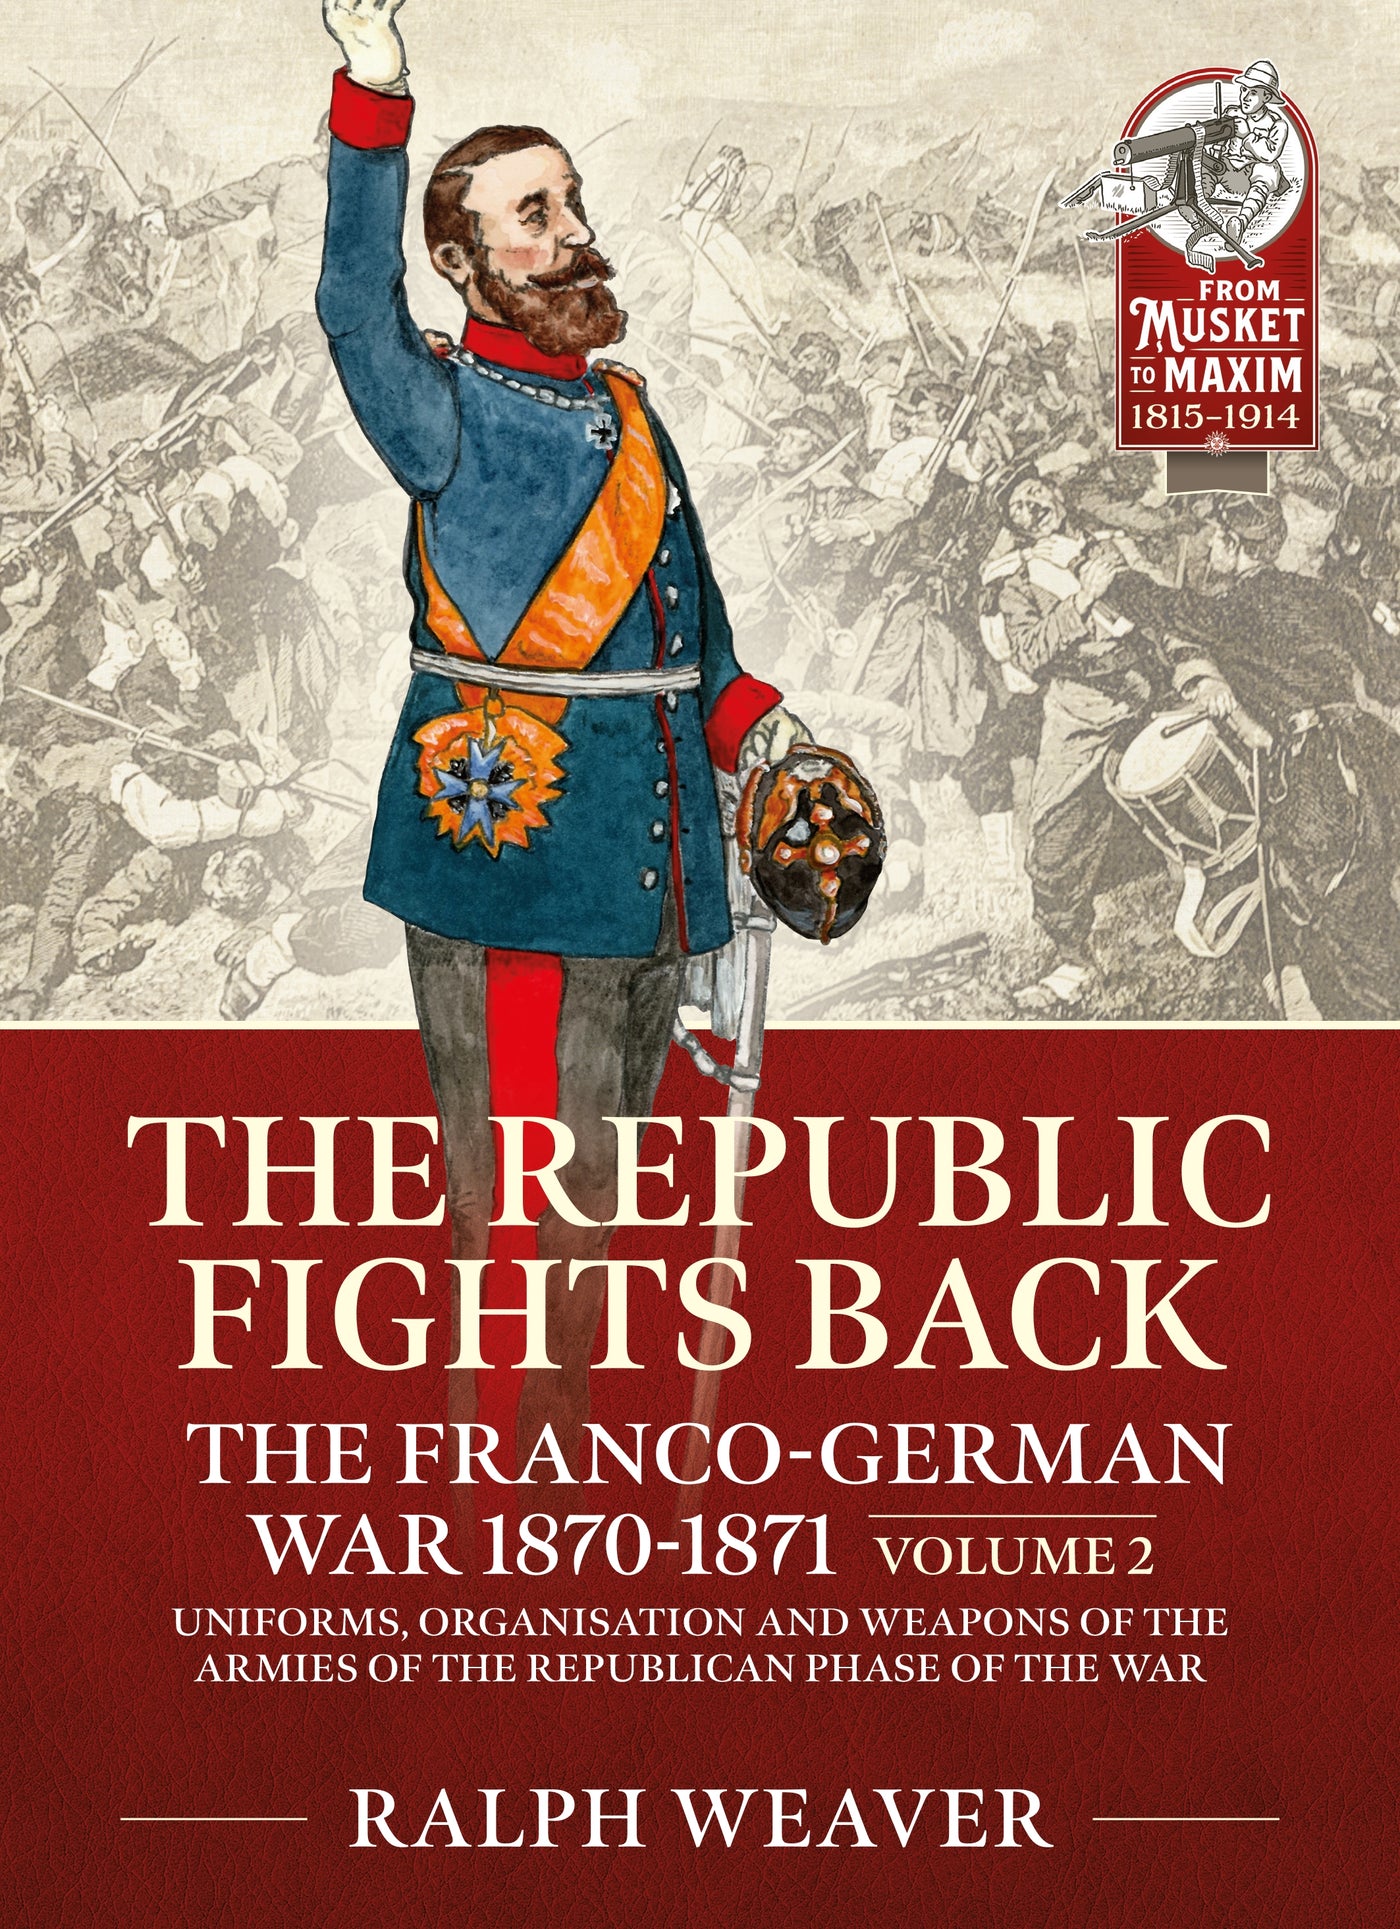 The Republic Fights Back: The Franco-German War 1870-1871